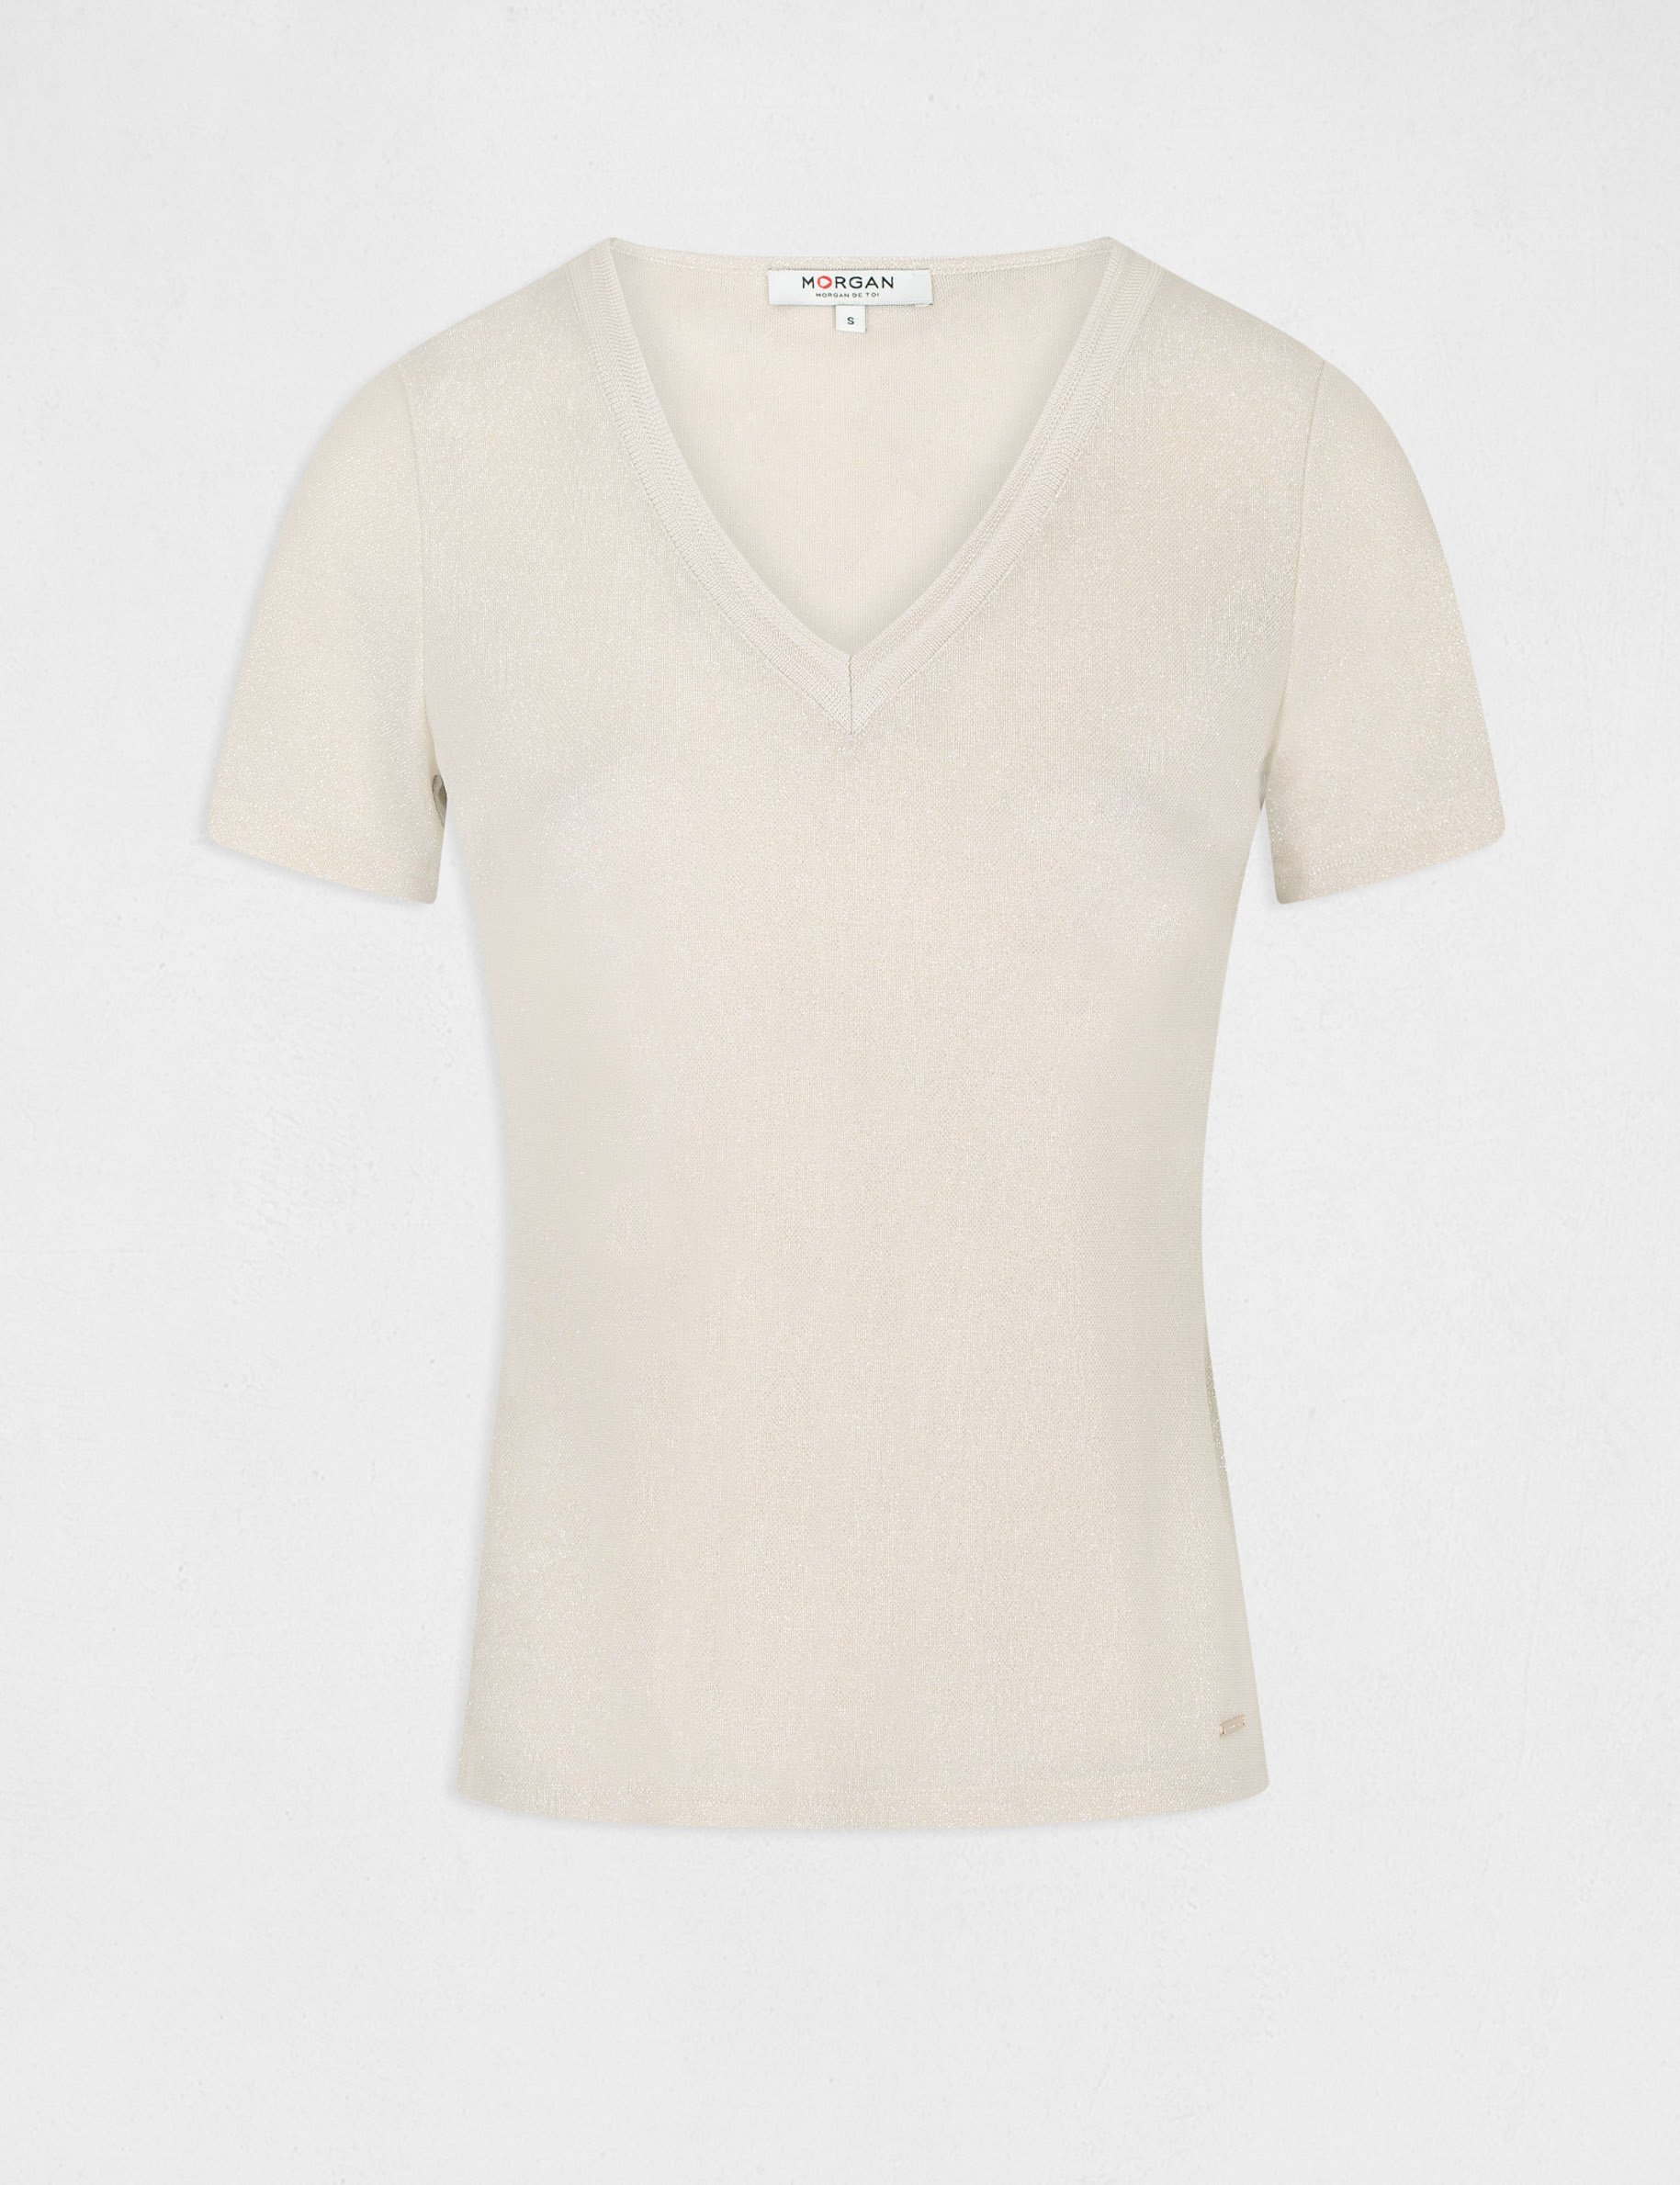 Short-sleeved t-shirt with V-neck ivory ladies'